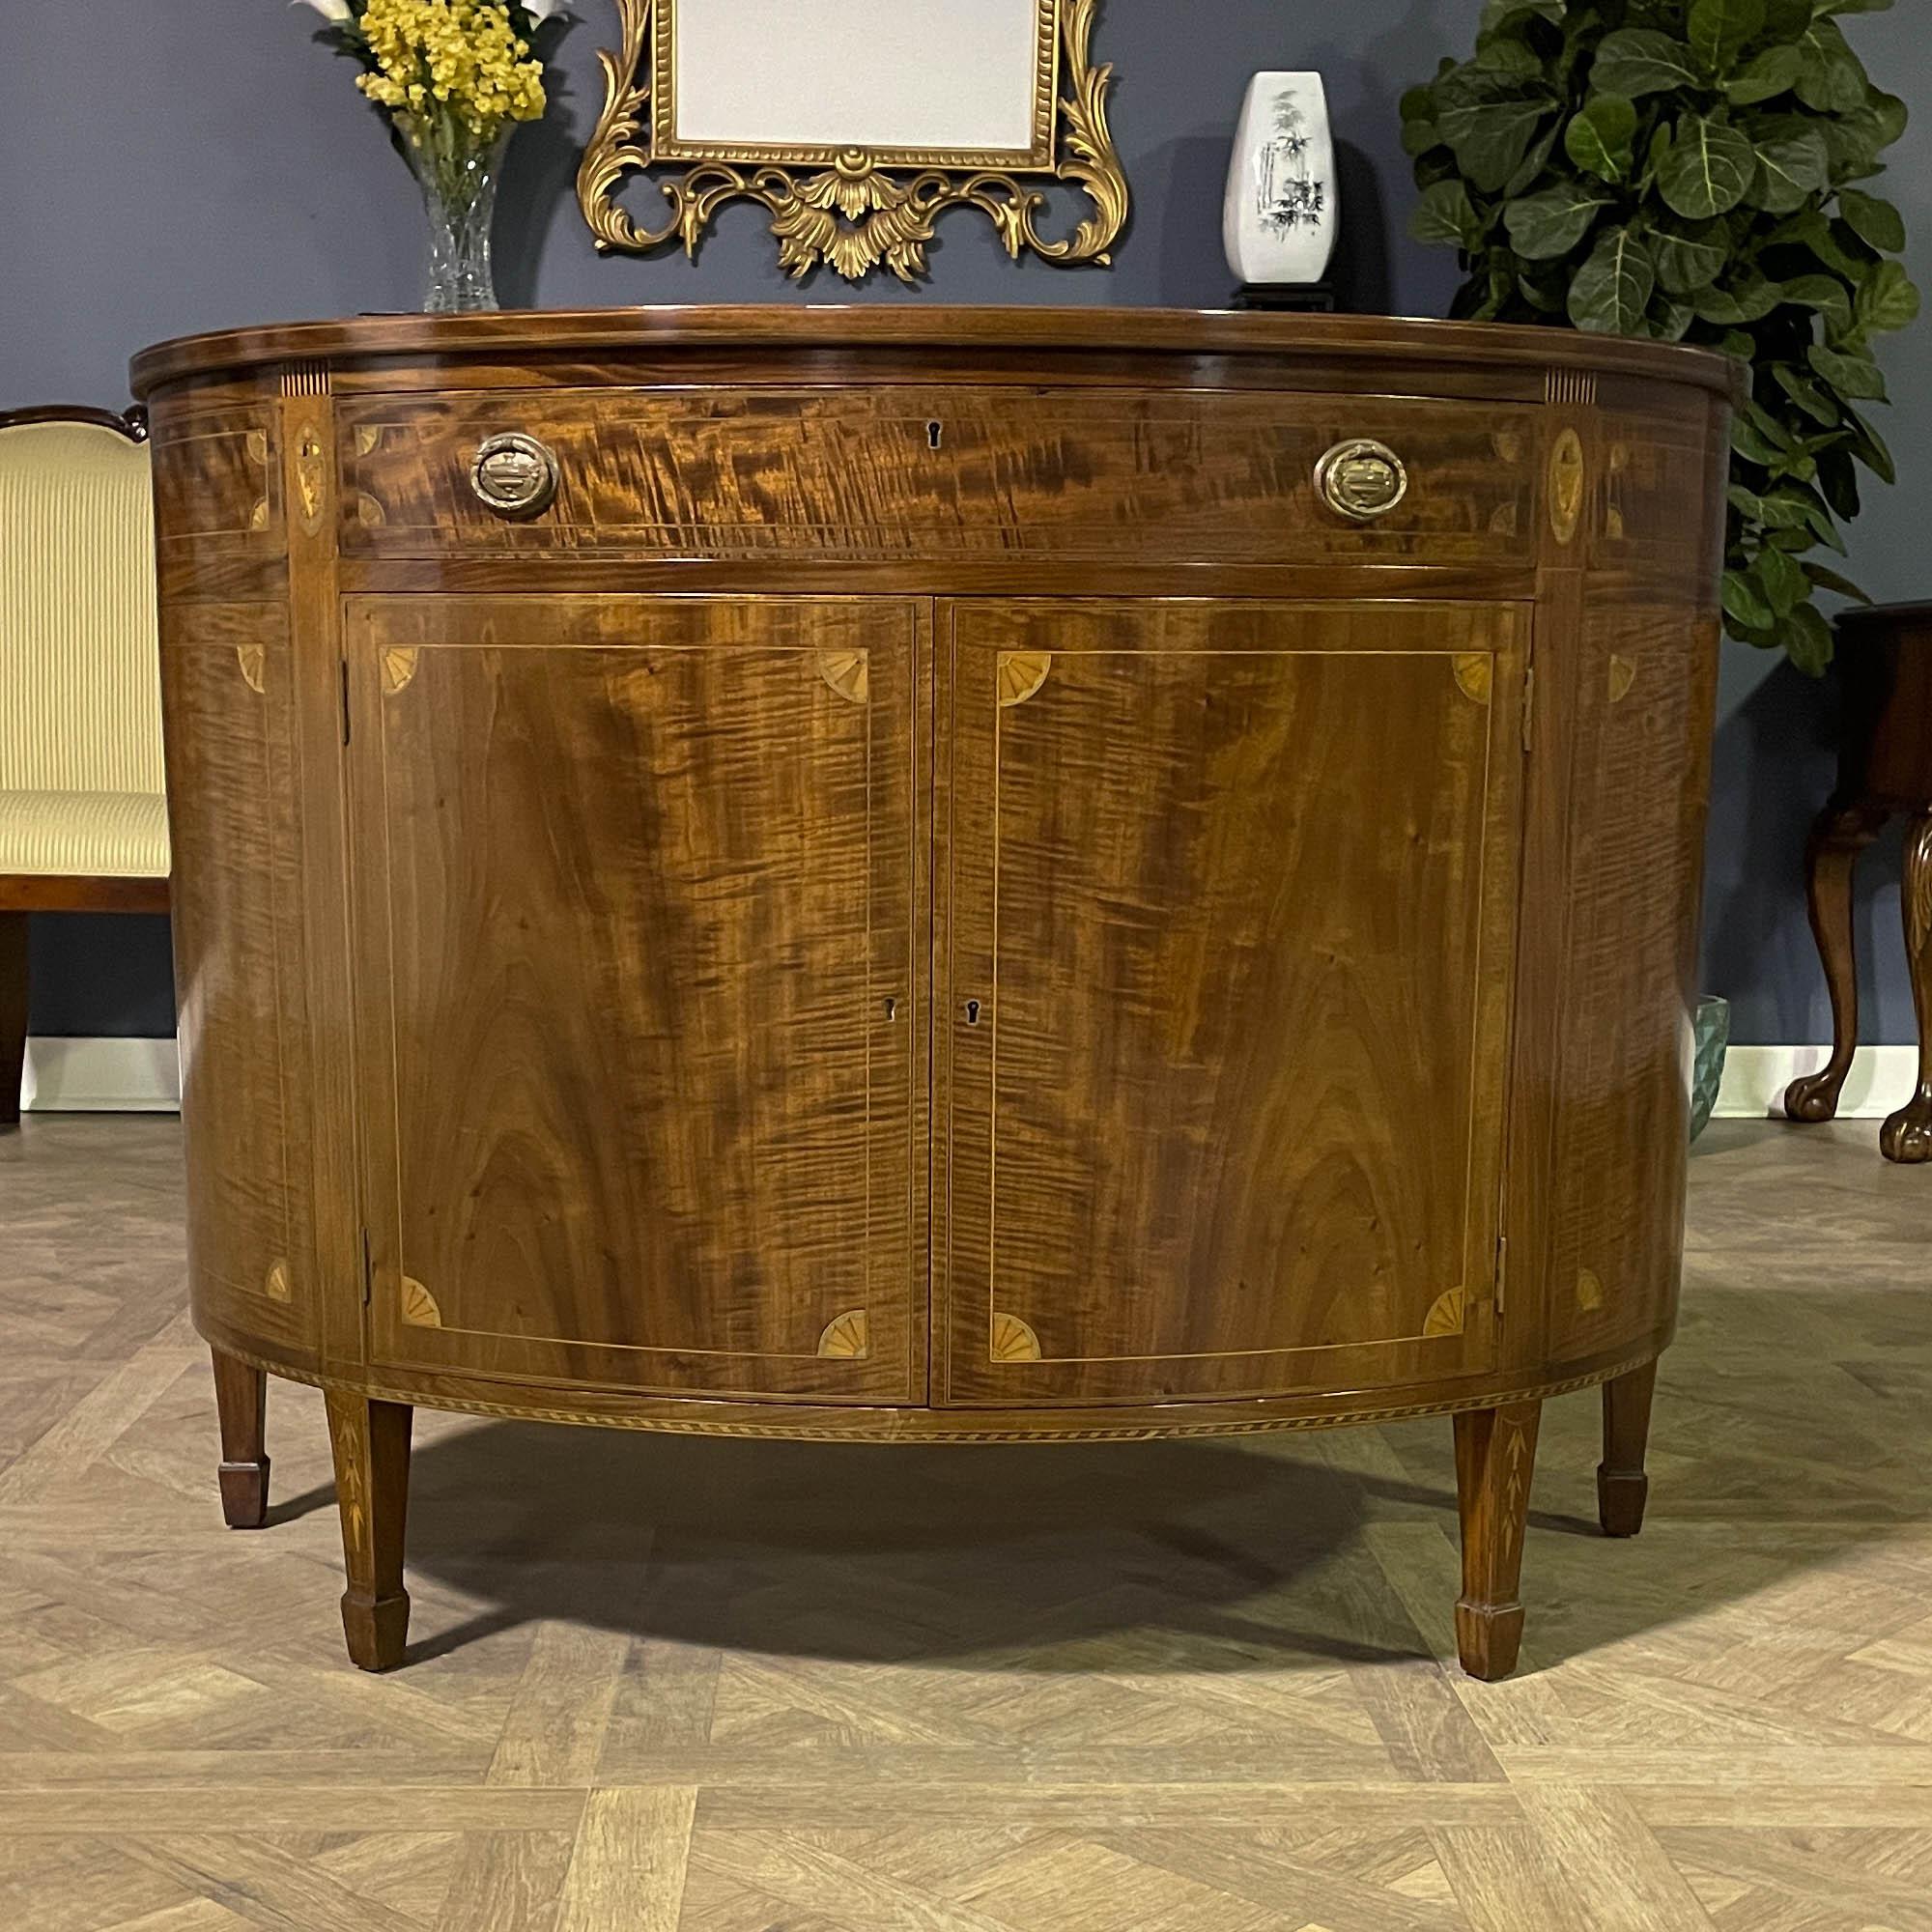 From Niagara Furniture a Vintage Potthast Demi Lune Cabinet in excellent original, condition, although the top has recently been French polished to remove some surface wear. This is a very rare survivor. Incredibly well built this cabinet is as